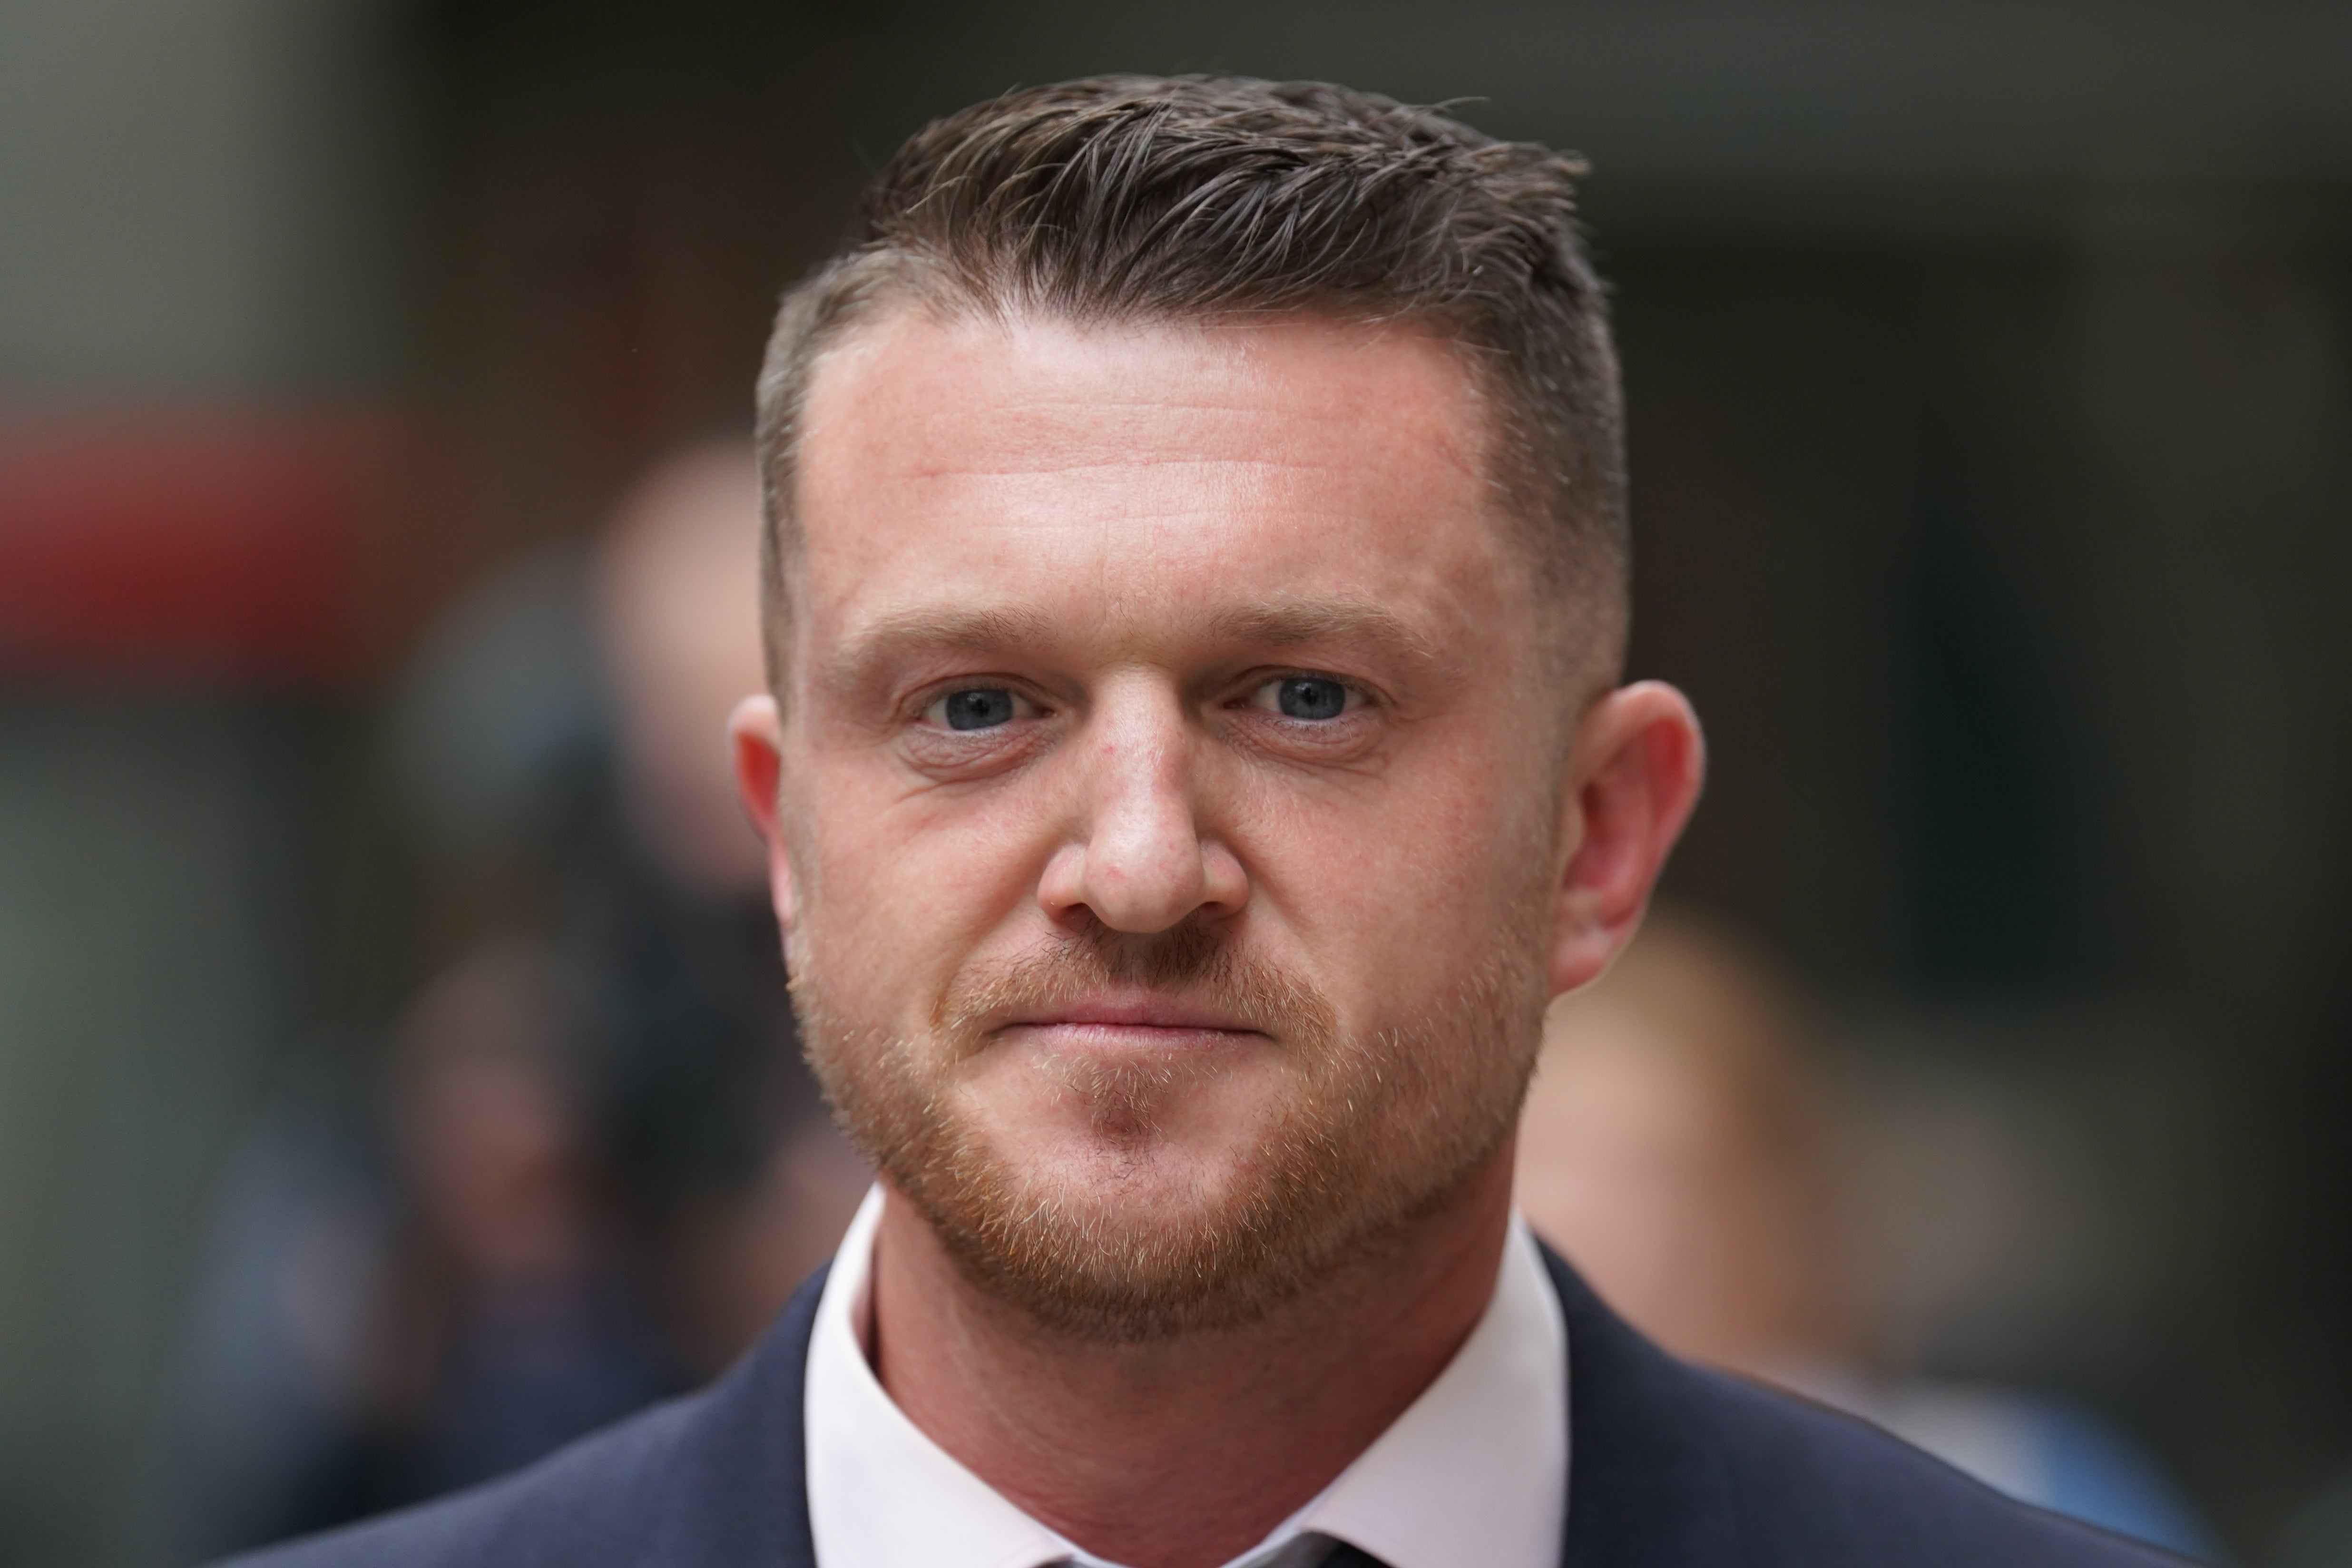 Tommy Robinson failed to show up to be questioned about his finances